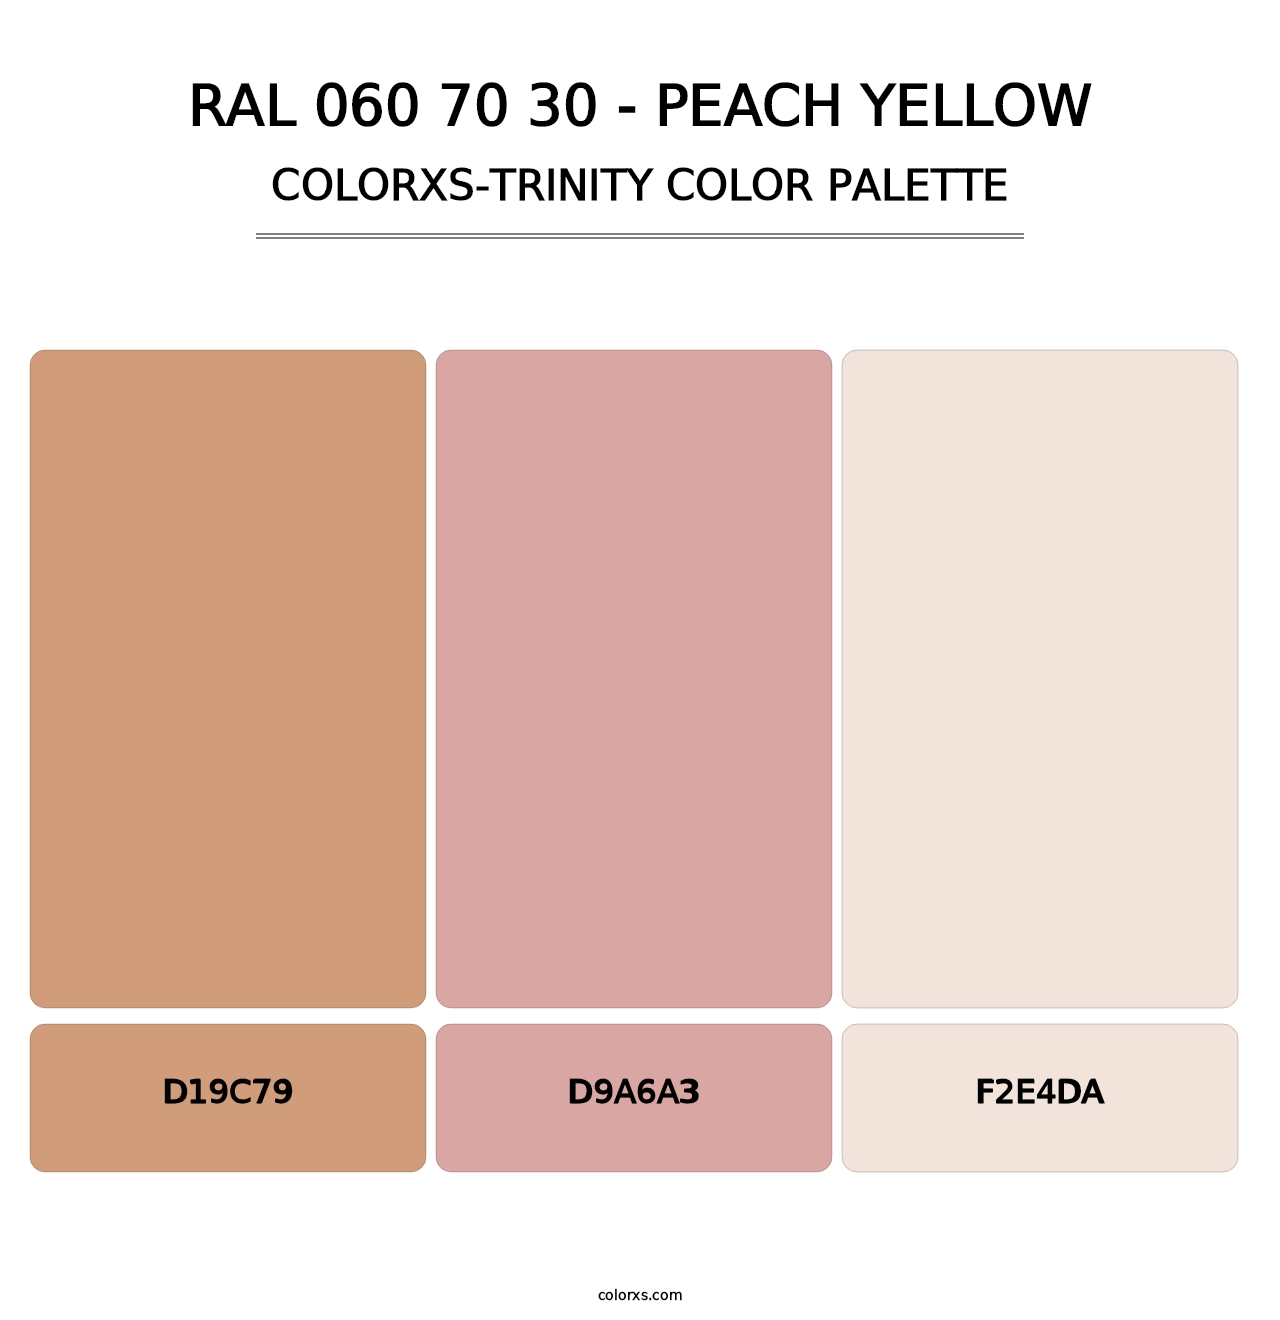 RAL 060 70 30 - Peach Yellow - Colorxs Trinity Palette